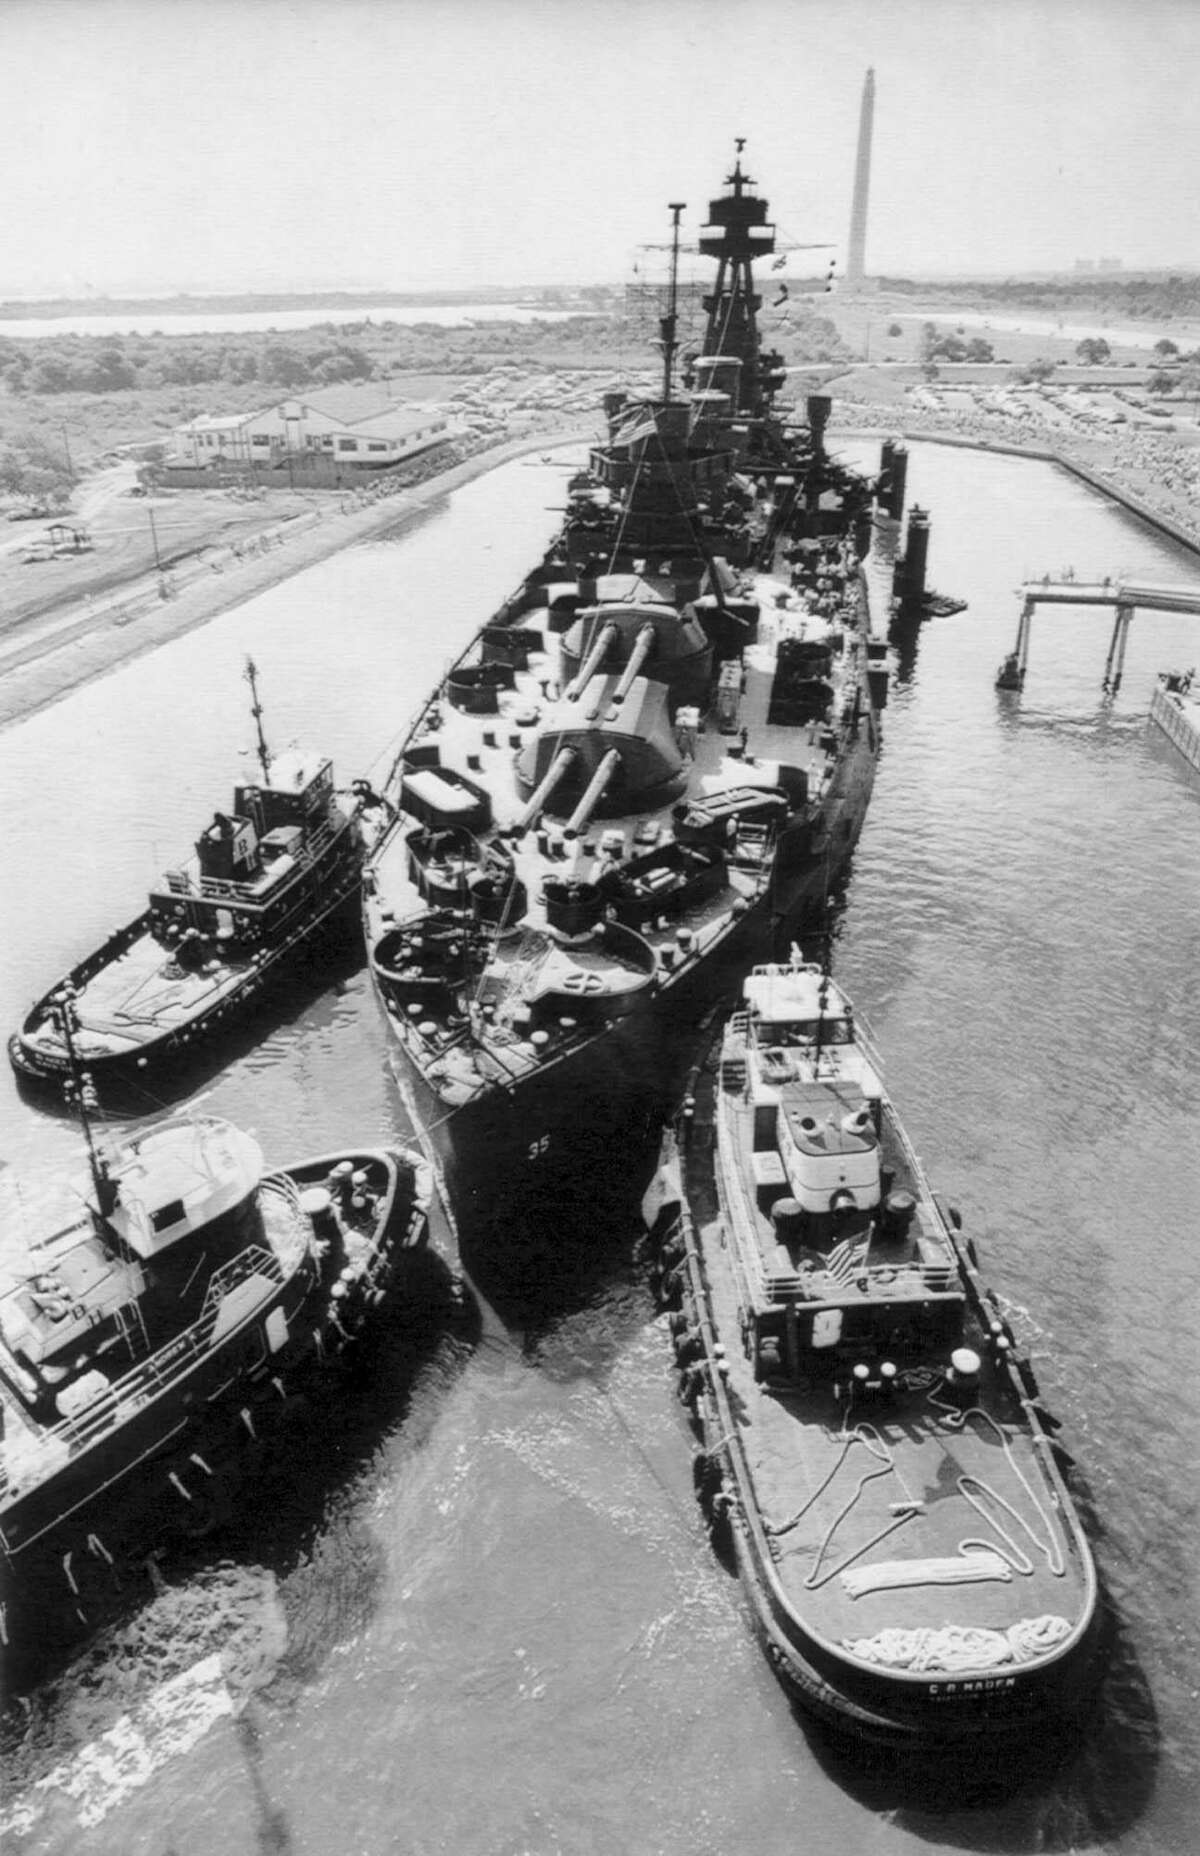 The restored Battleship Texas is returned to its permanent berth at San Jacinto State Park on July 26, 1990, after spending a year and a half in dry dock in Galveston for a $14 million face-lift.